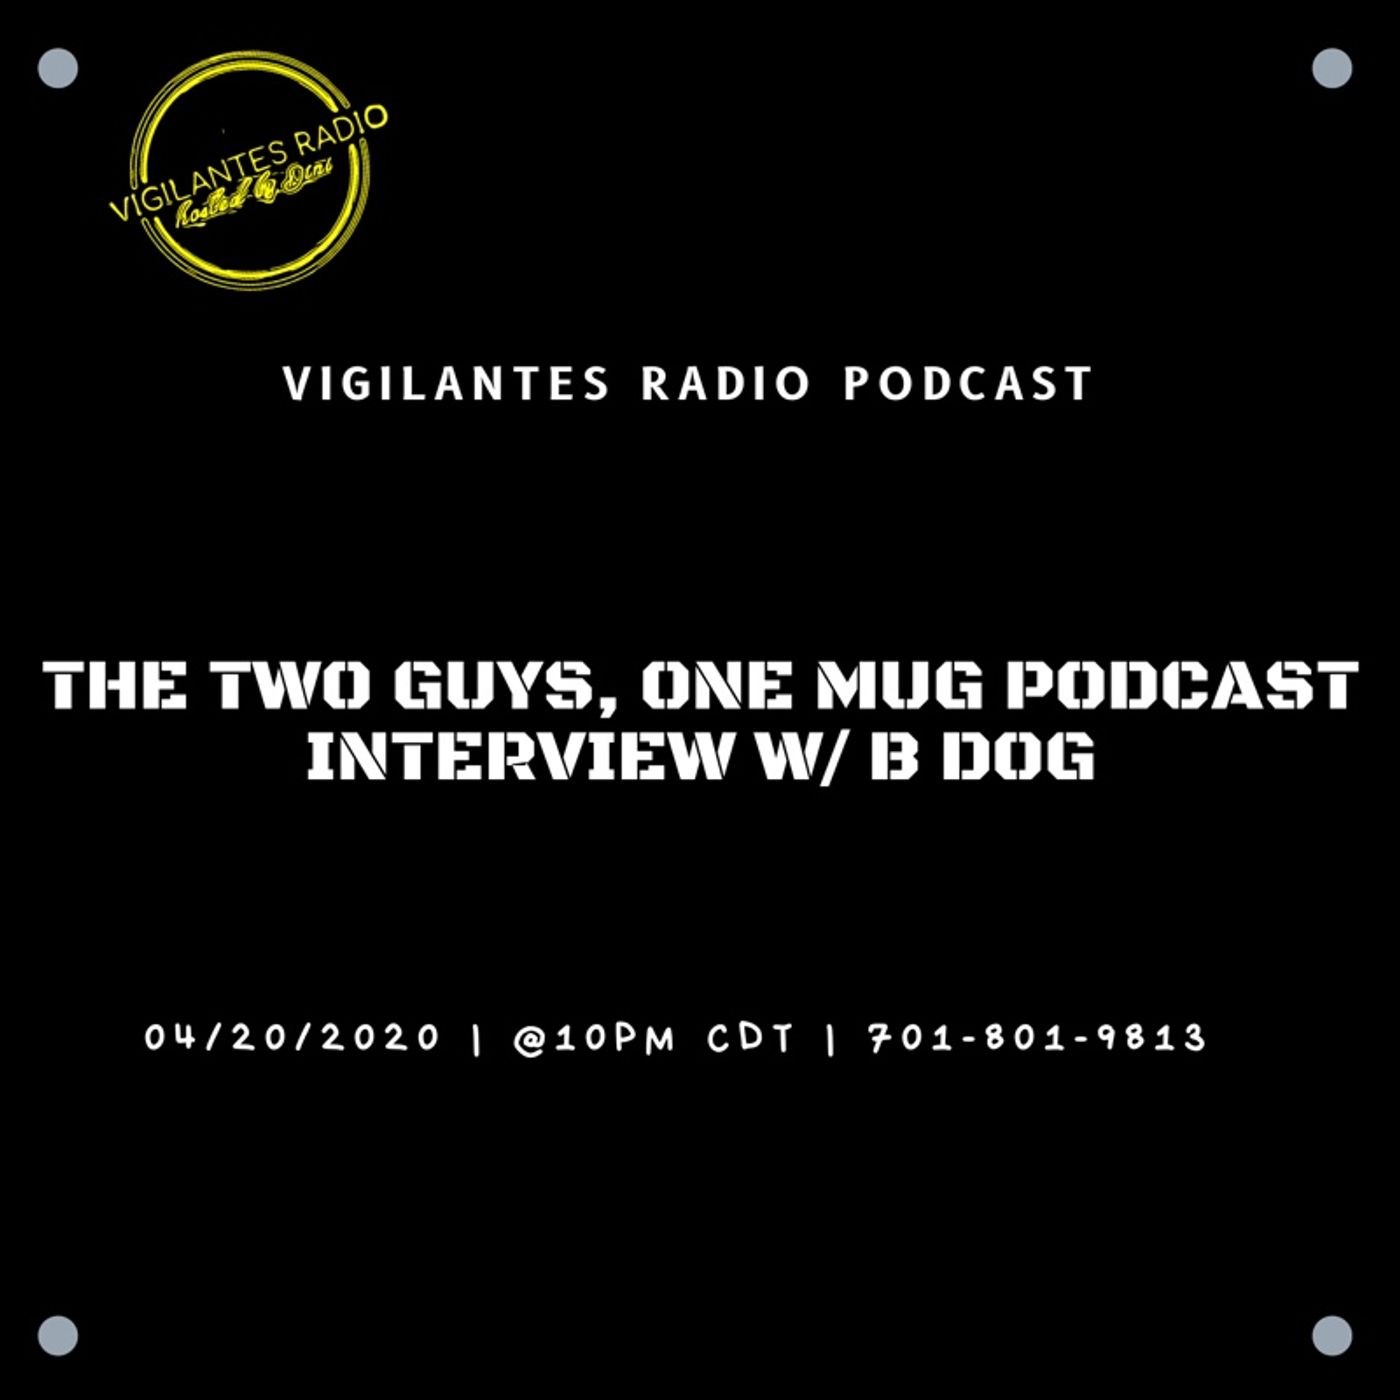 The Two Guys, One Mug Podcast  Interview W/B Dog. Image